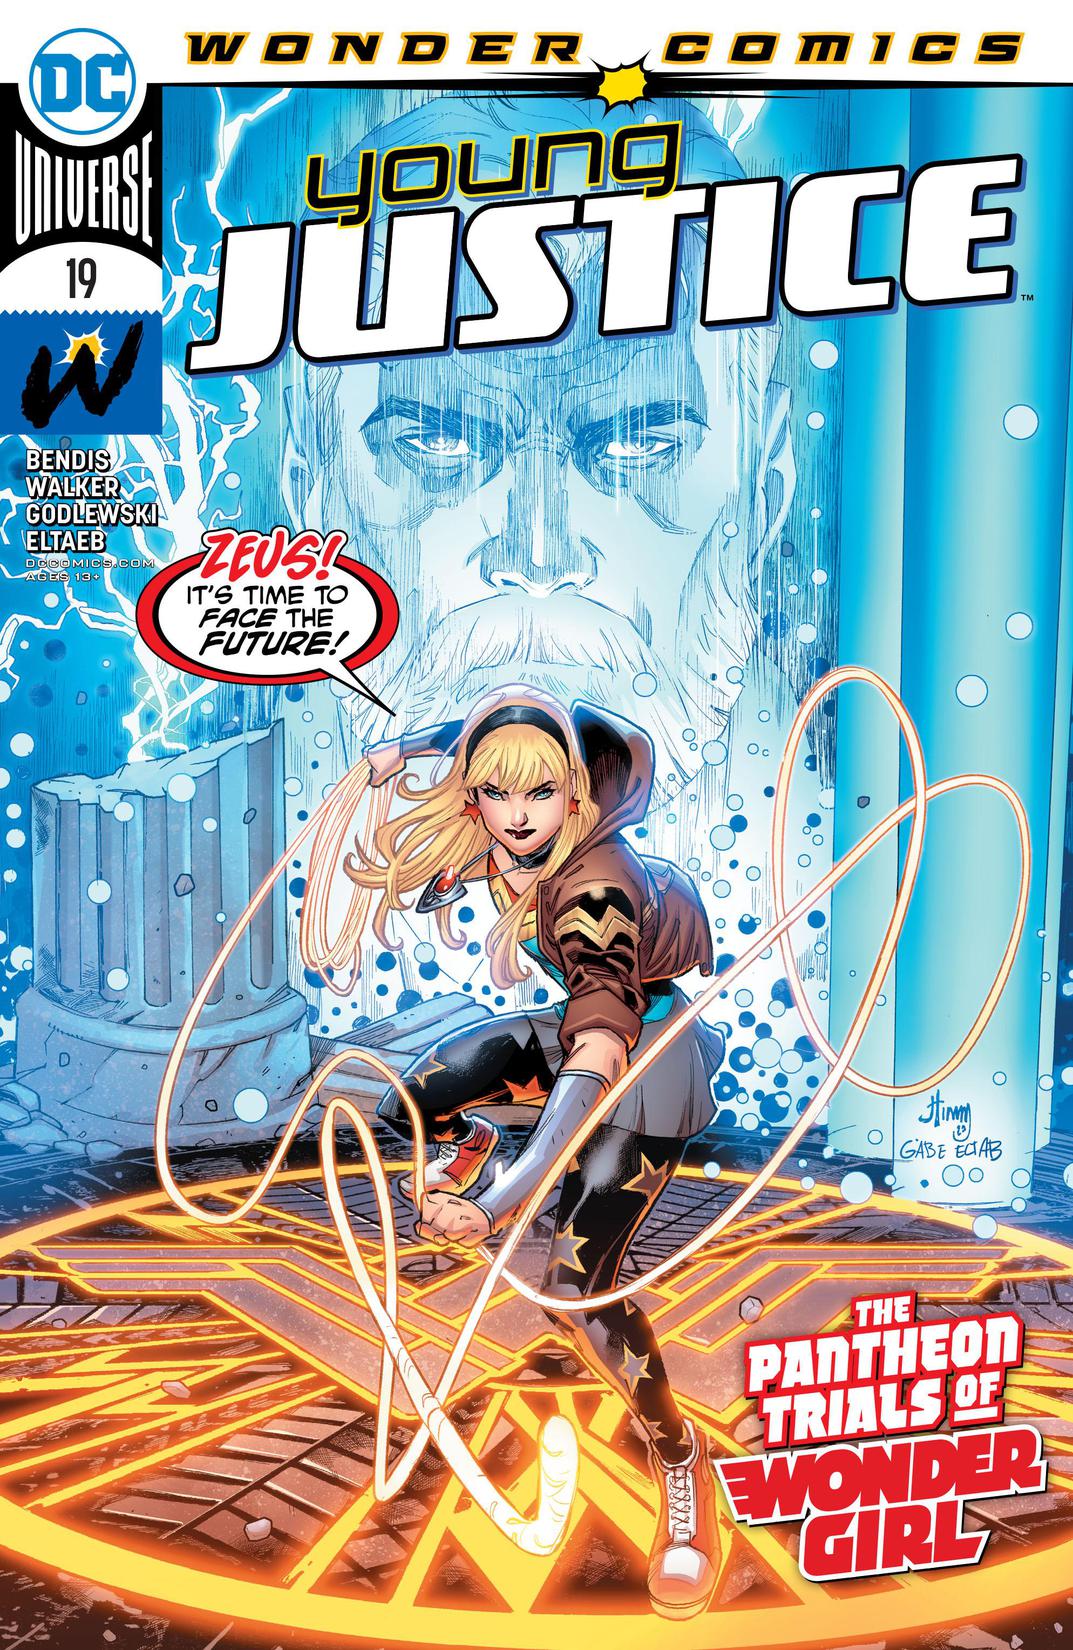 Young Justice (2019-) #19 preview images